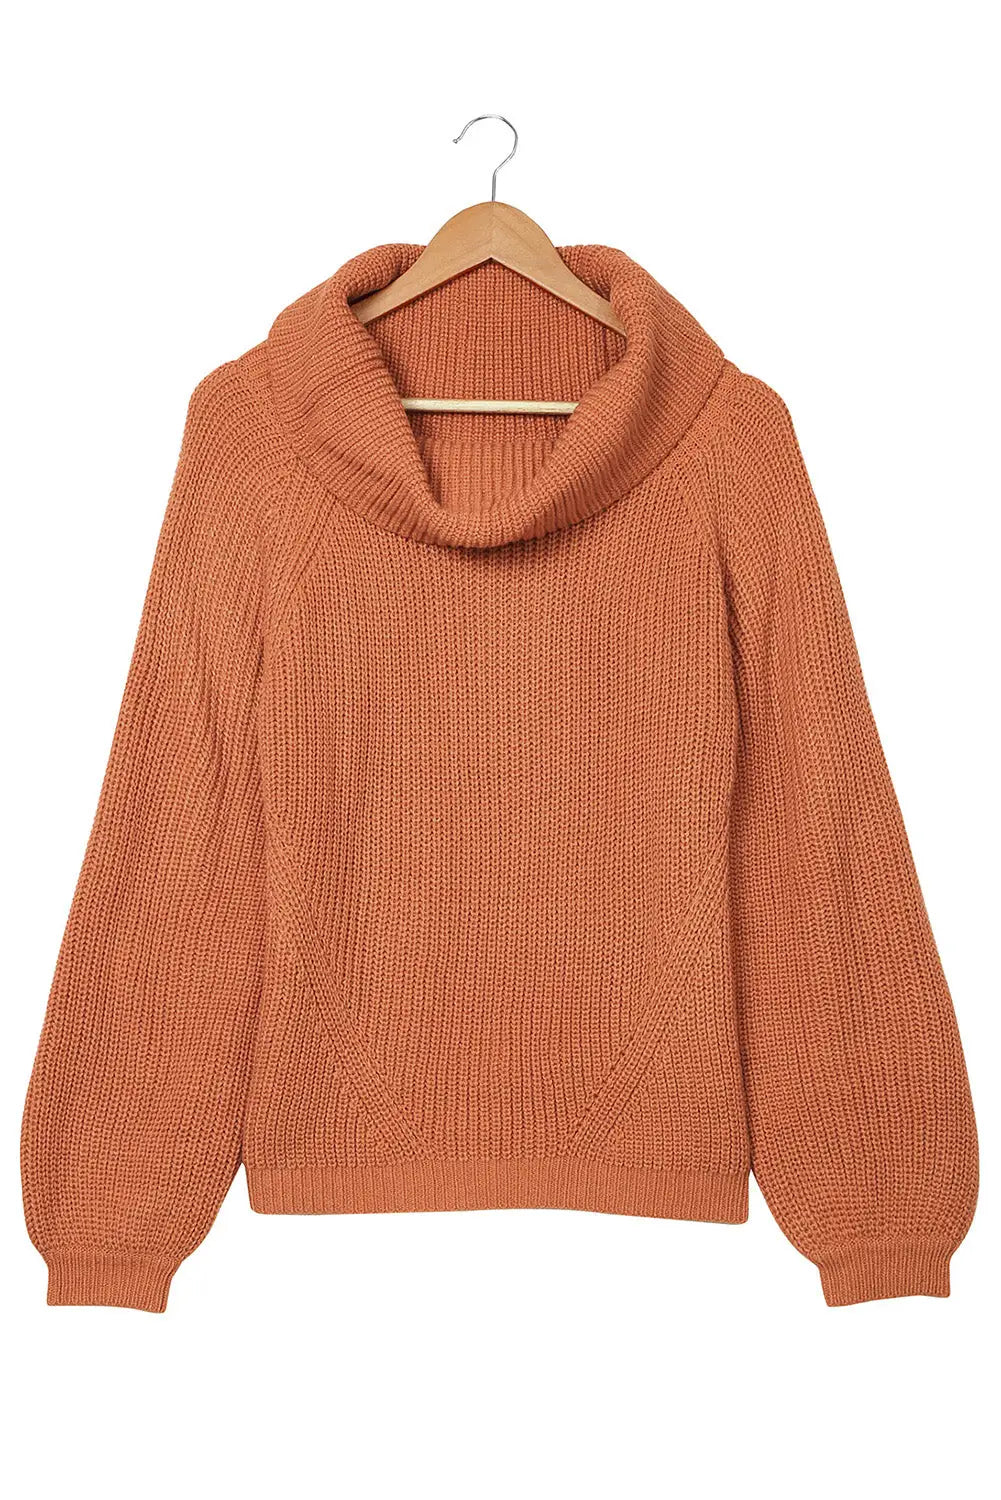 Brown ribbed knit off shoulder sweater - sweaters & cardigans